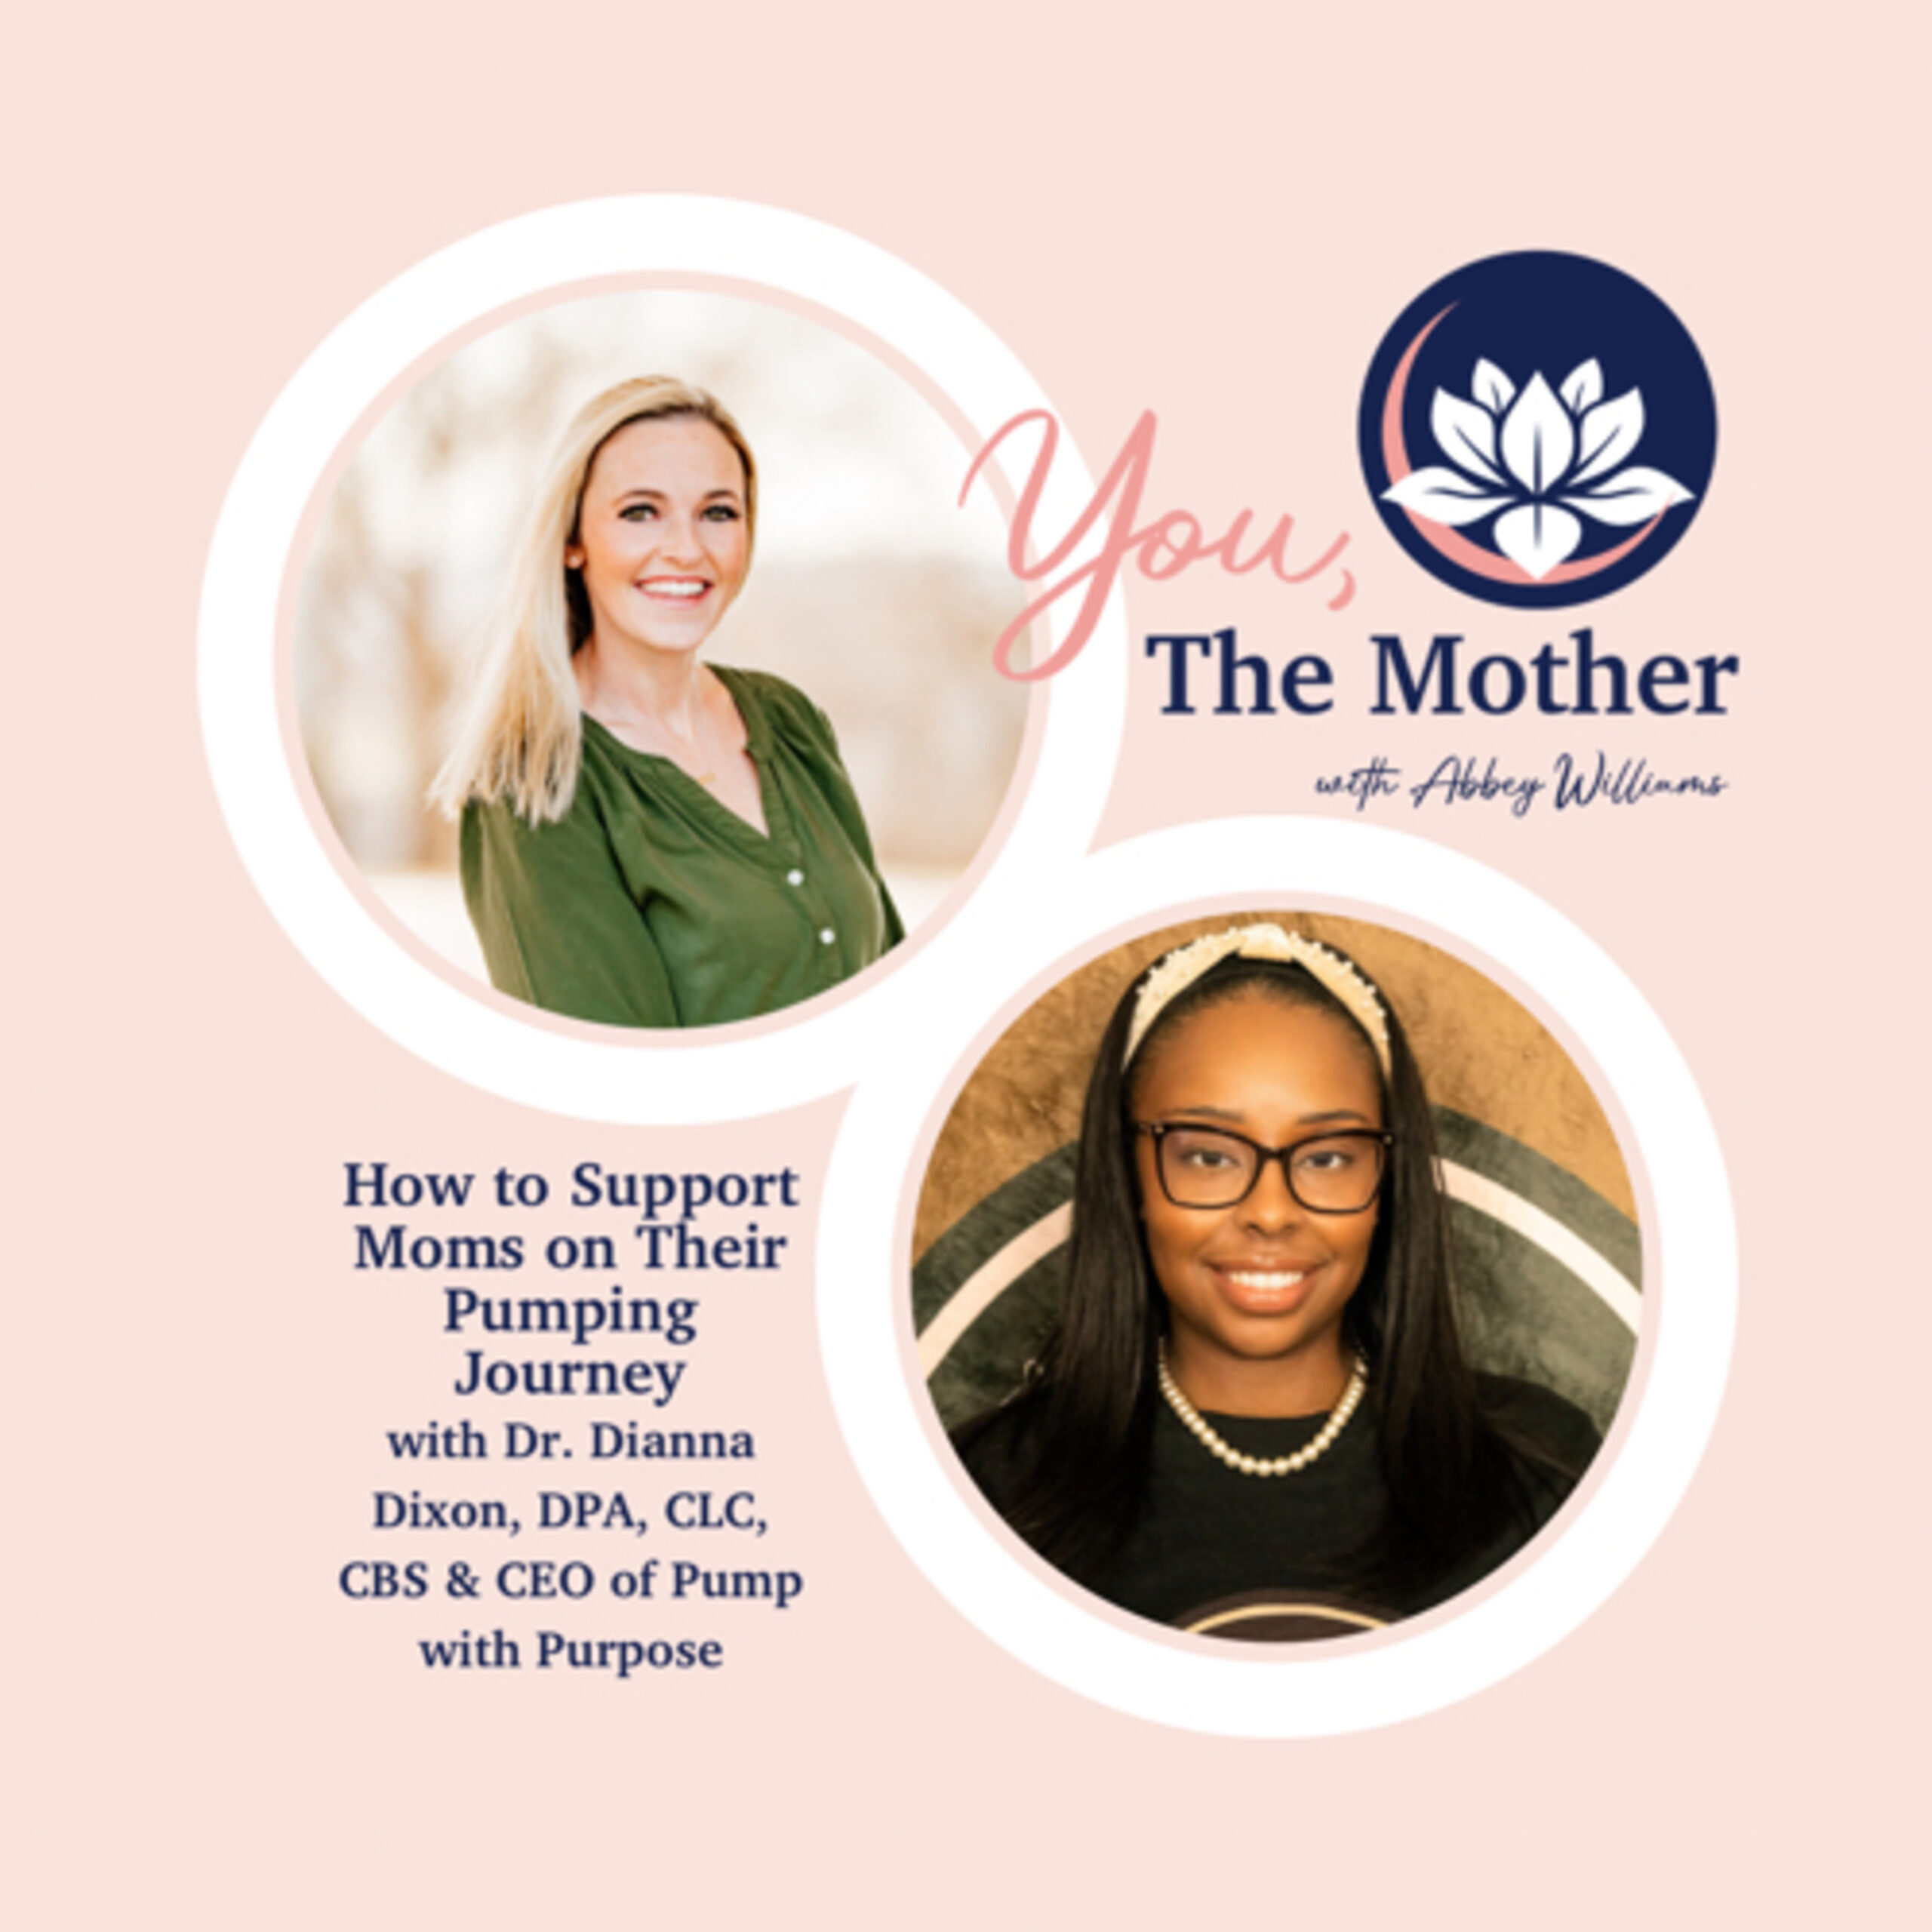 How to Support Moms on Their Pumping Journey With Dr. Dianna Dixon